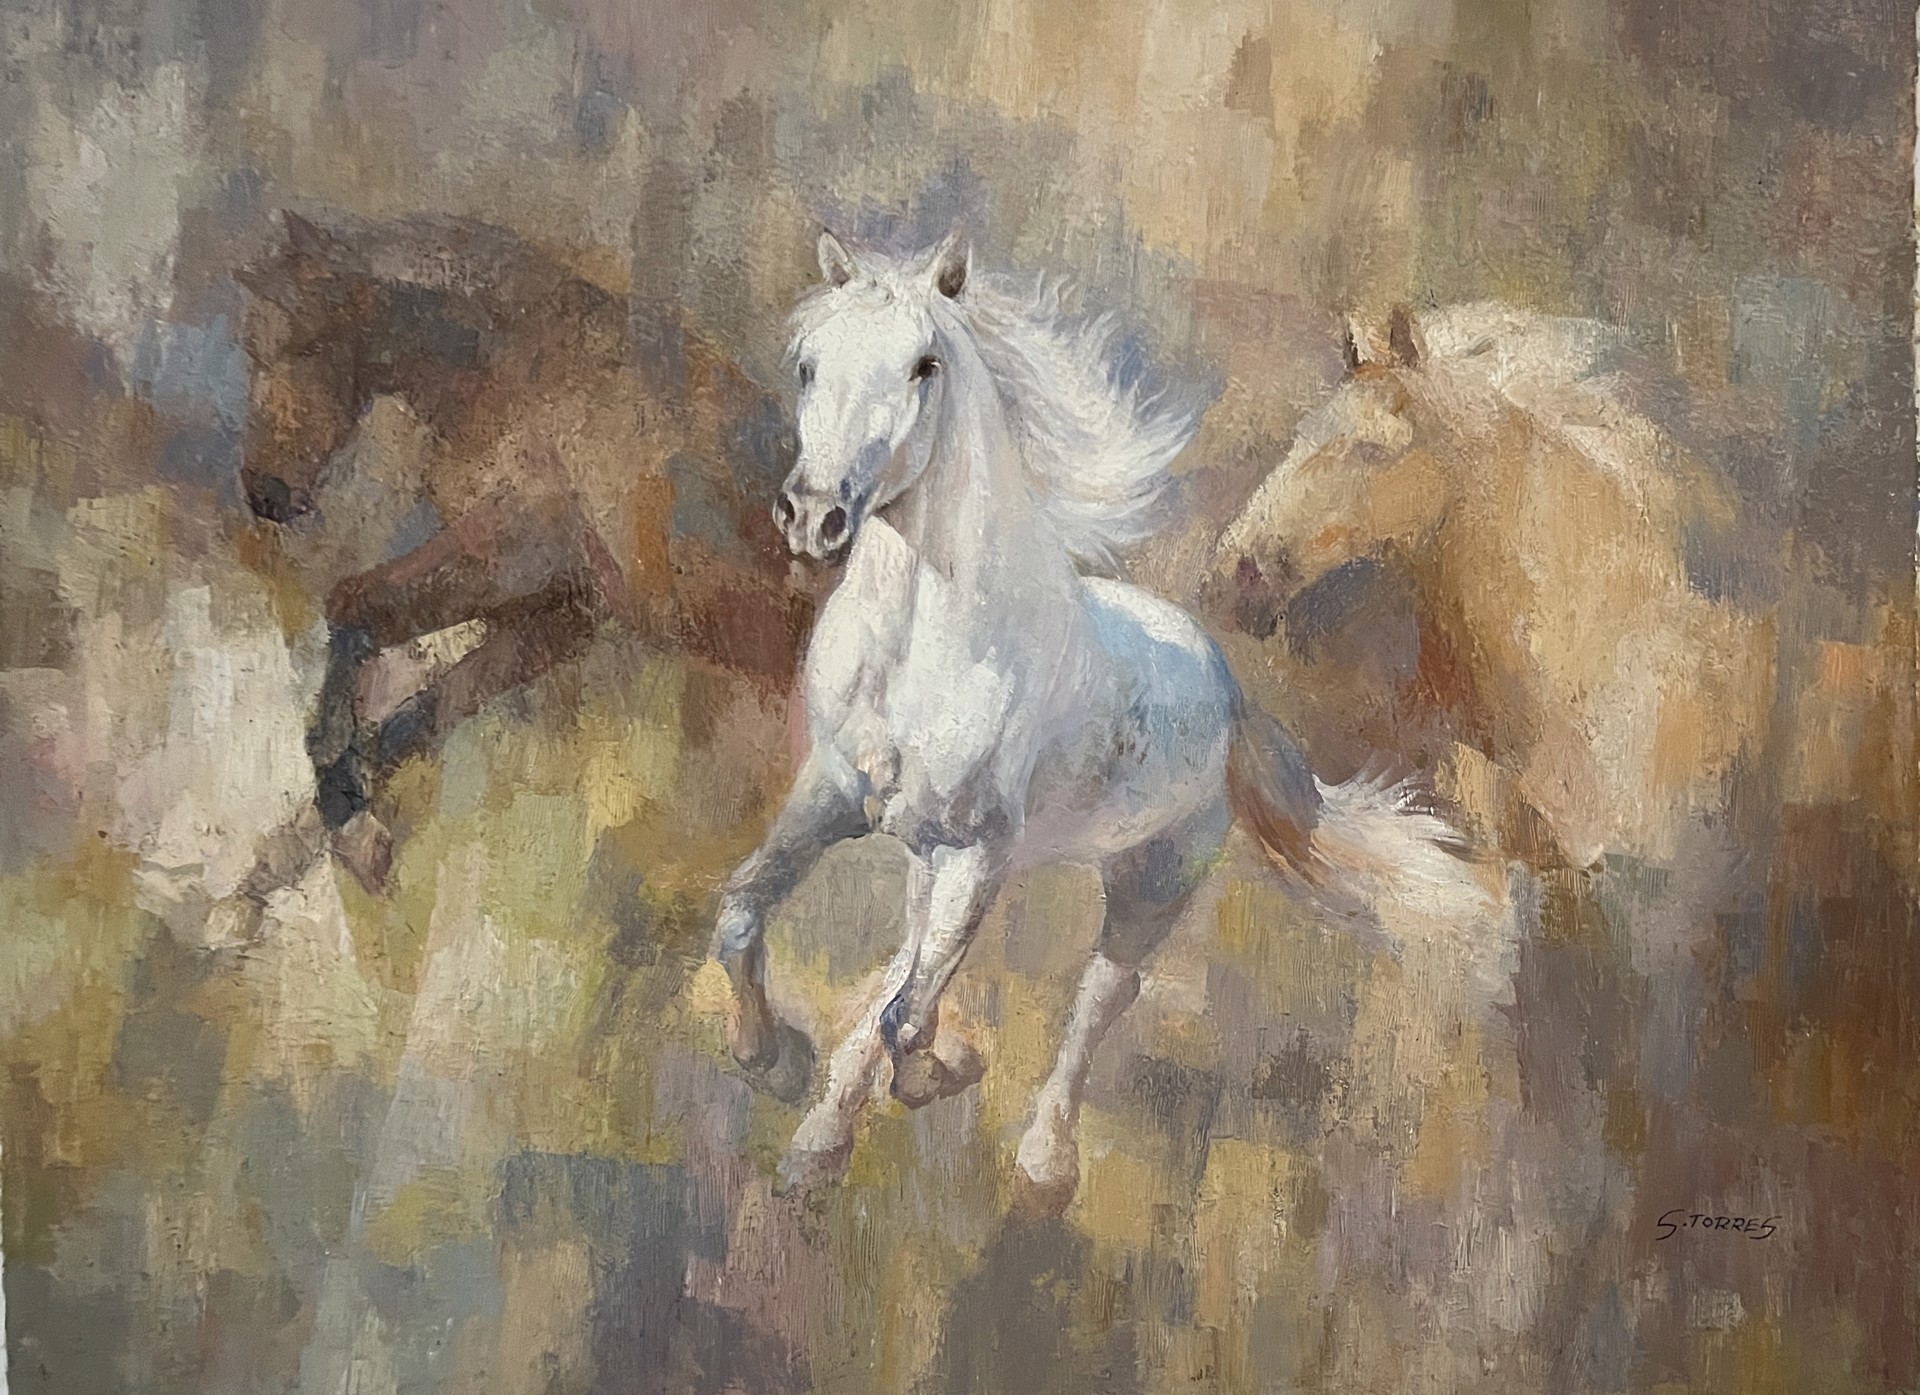 TRIO OF HORSES by S TORRES